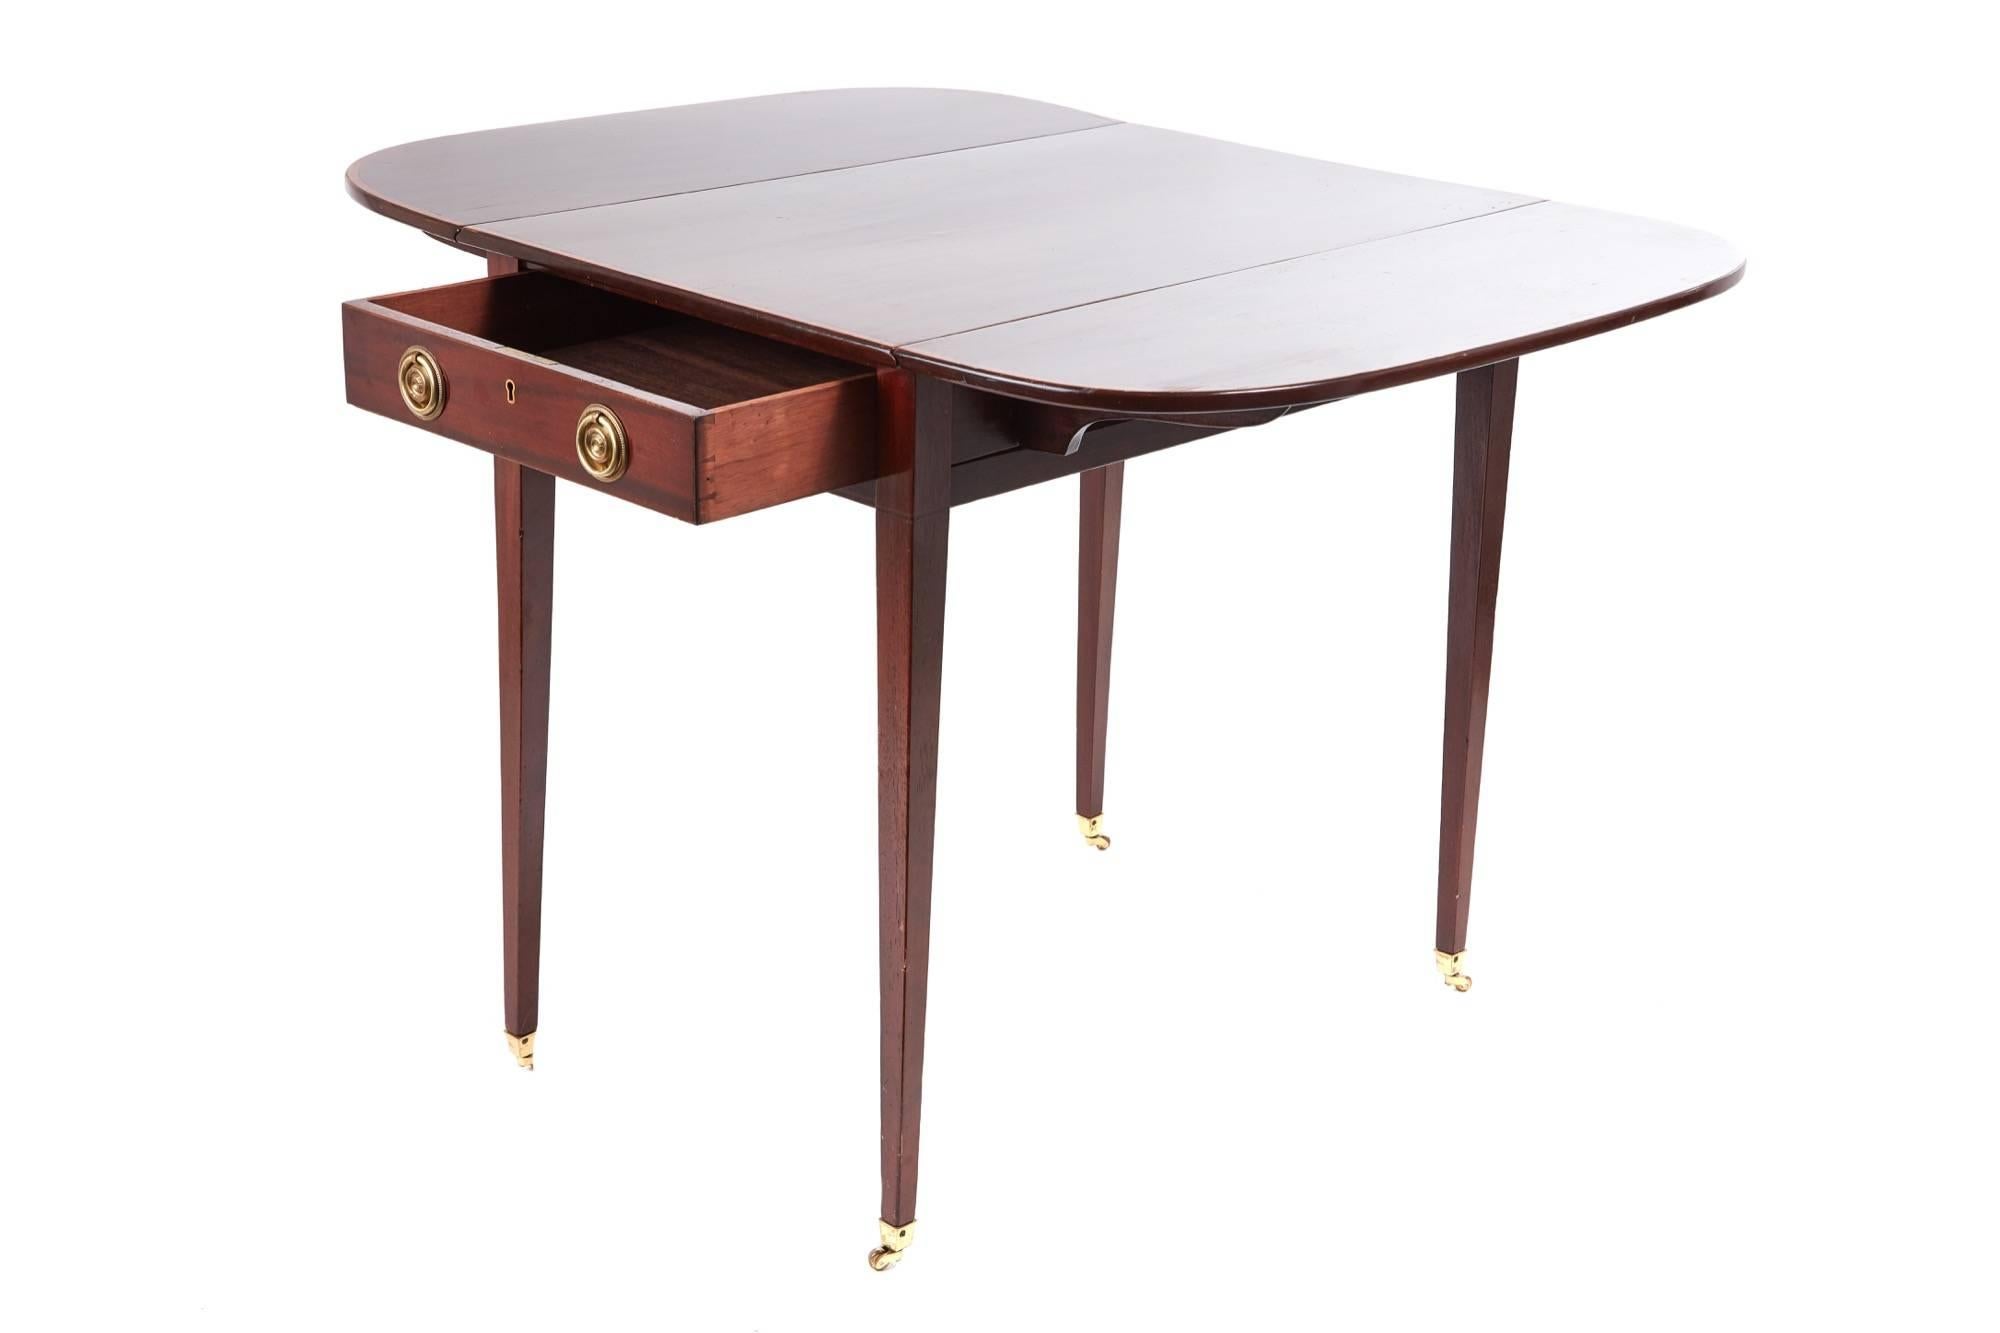 Georgian mahogany pembroke table, with a lovely mahogany top, two drop leaves, cross banded in satinwood, one frieze drawer with original brass handles, standing on four elegant square tapering legs with original brass castors
Lovely color and